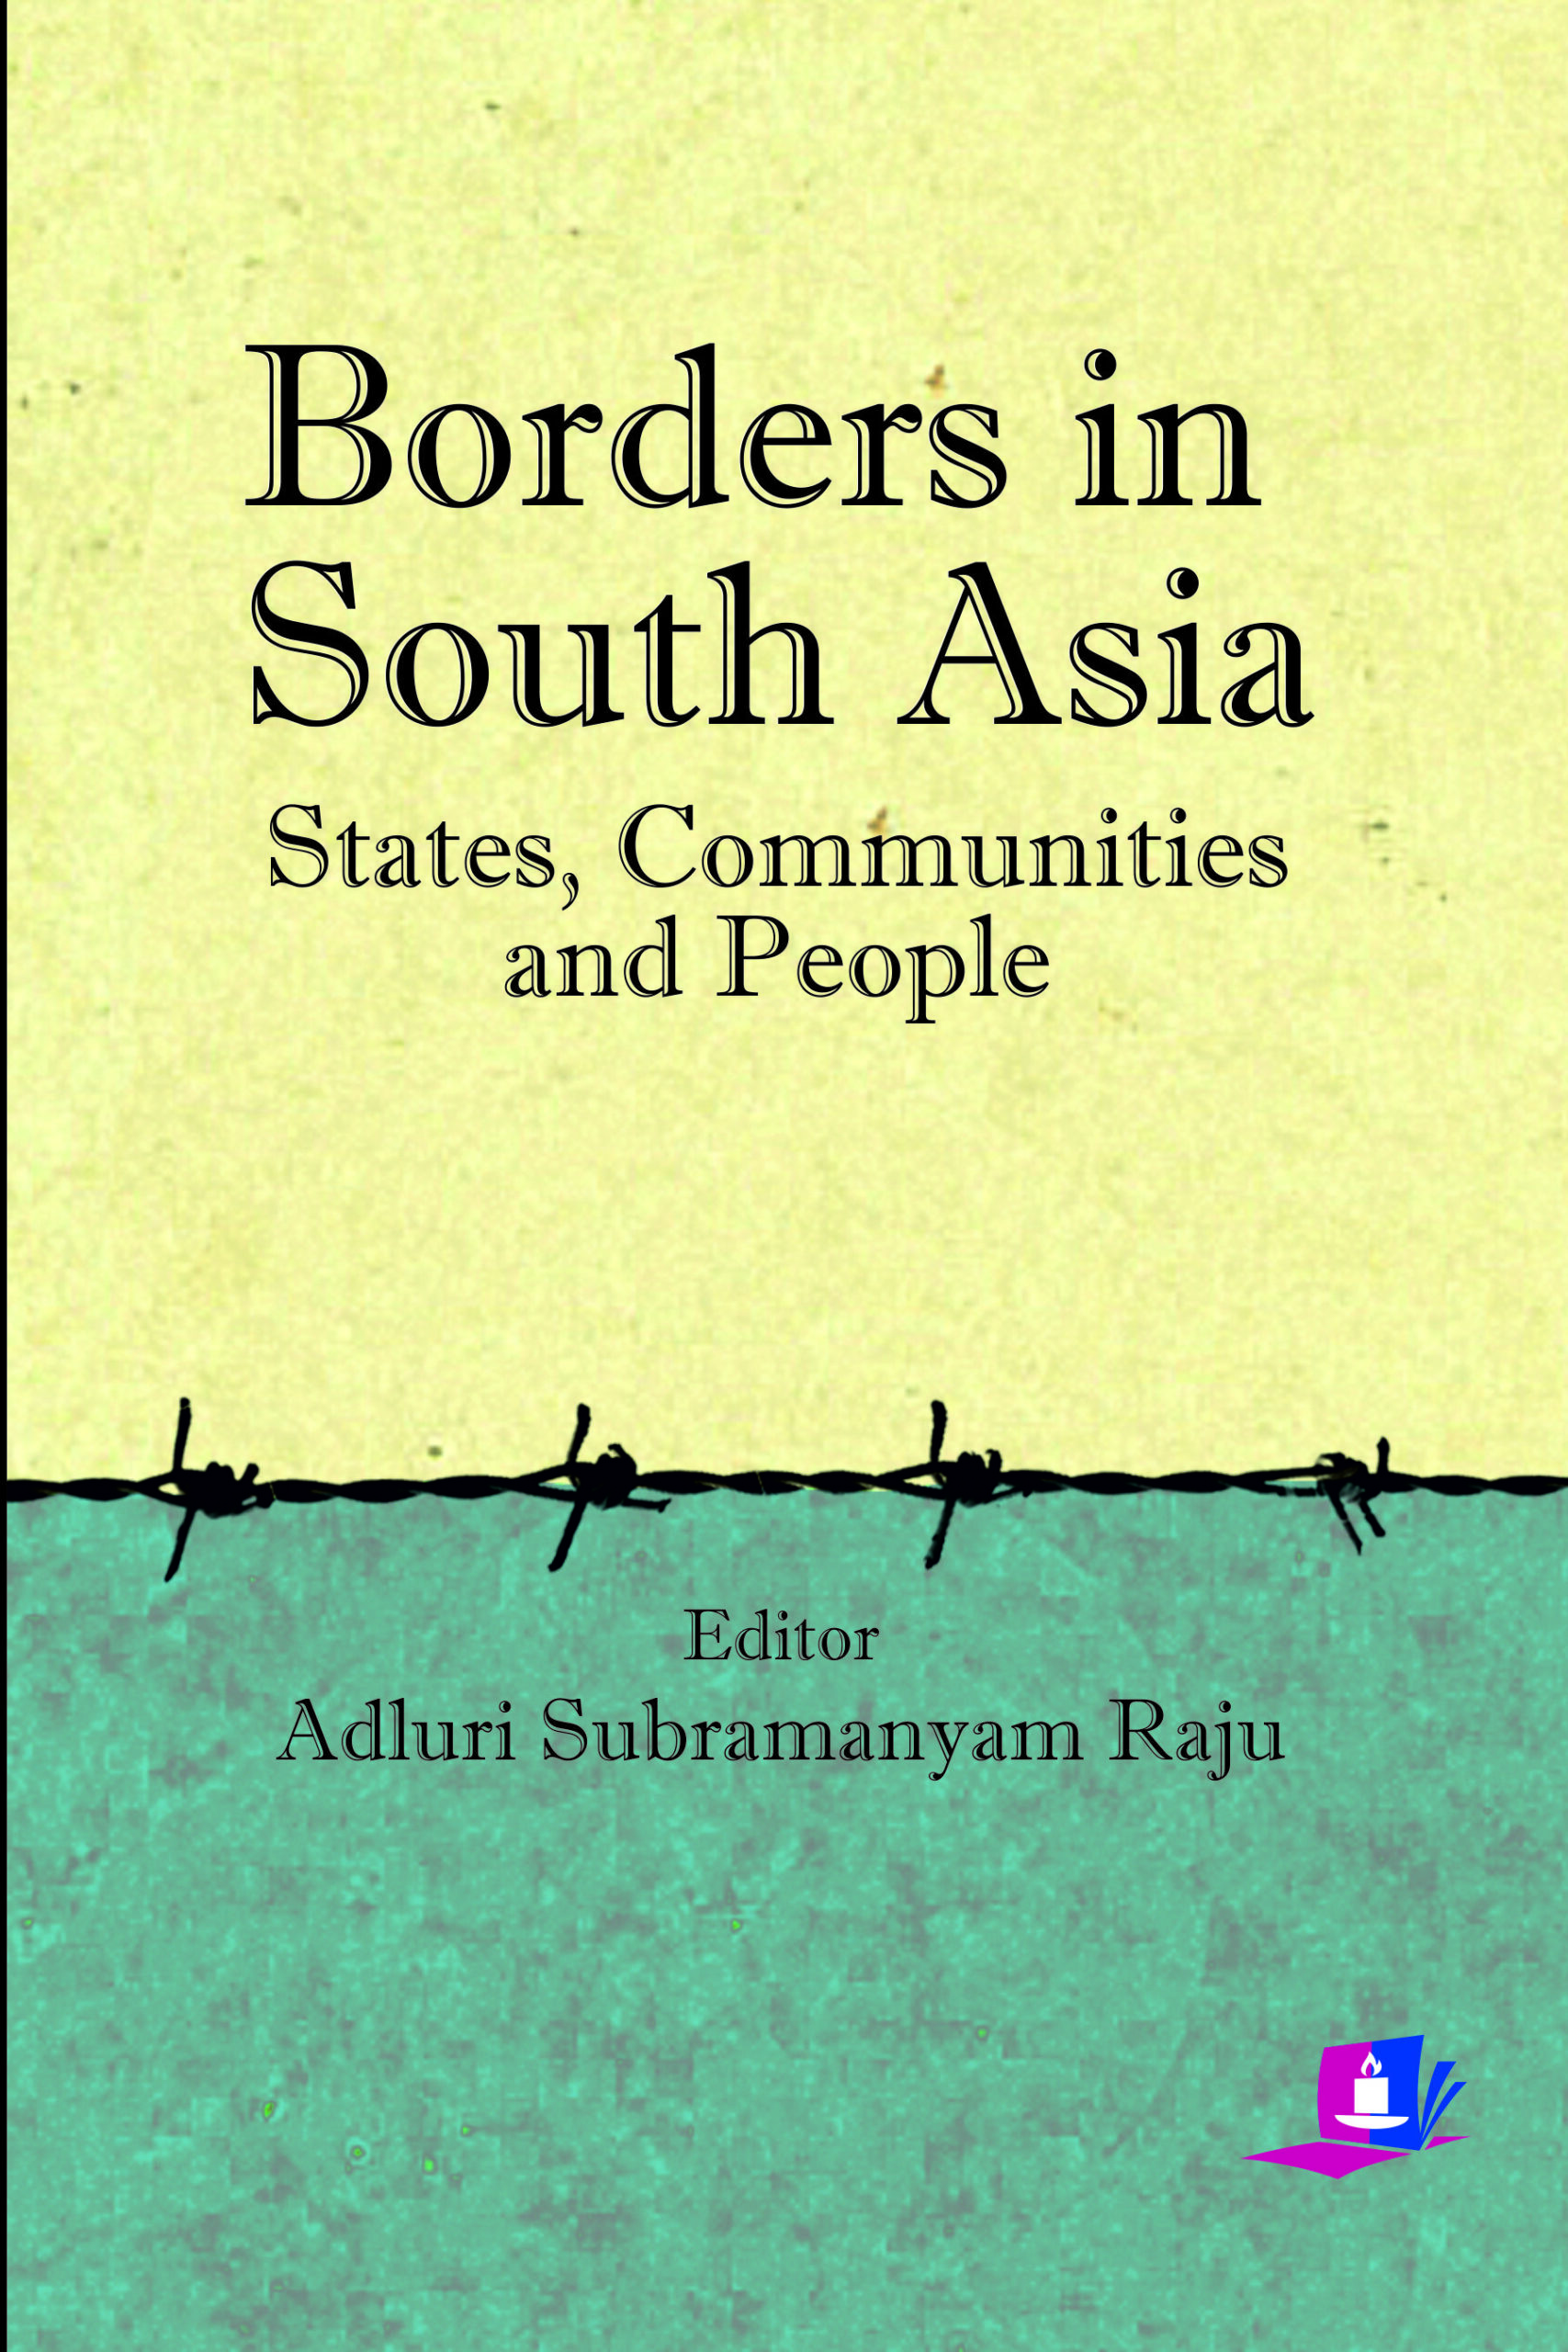 Borders in South Asia